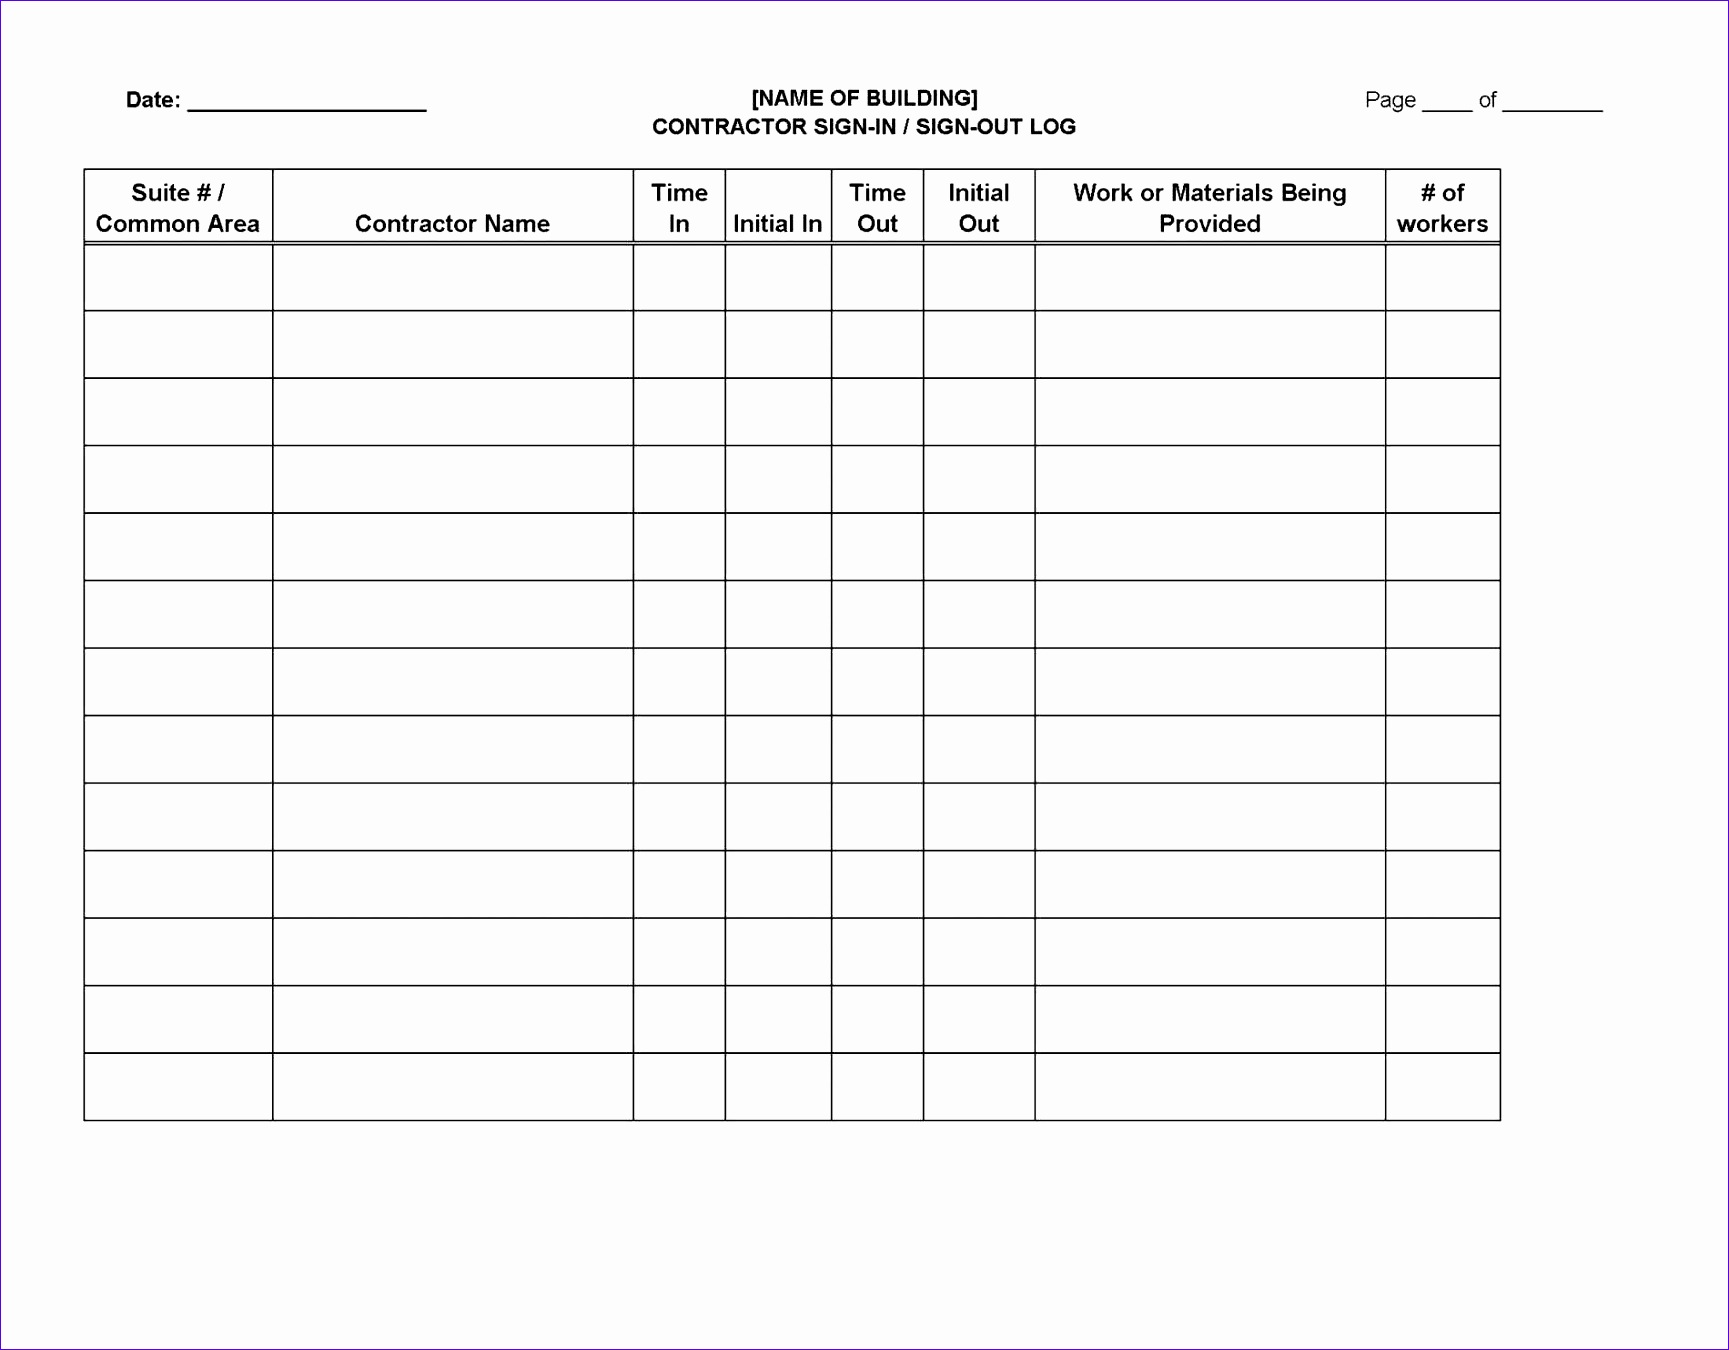 Employee Vacation Tracker vacation tracking calendar excel template time spreadsheet teerve sheet employee Employee Vacation Tracker time tracking spreadsheet teerve sheet travel